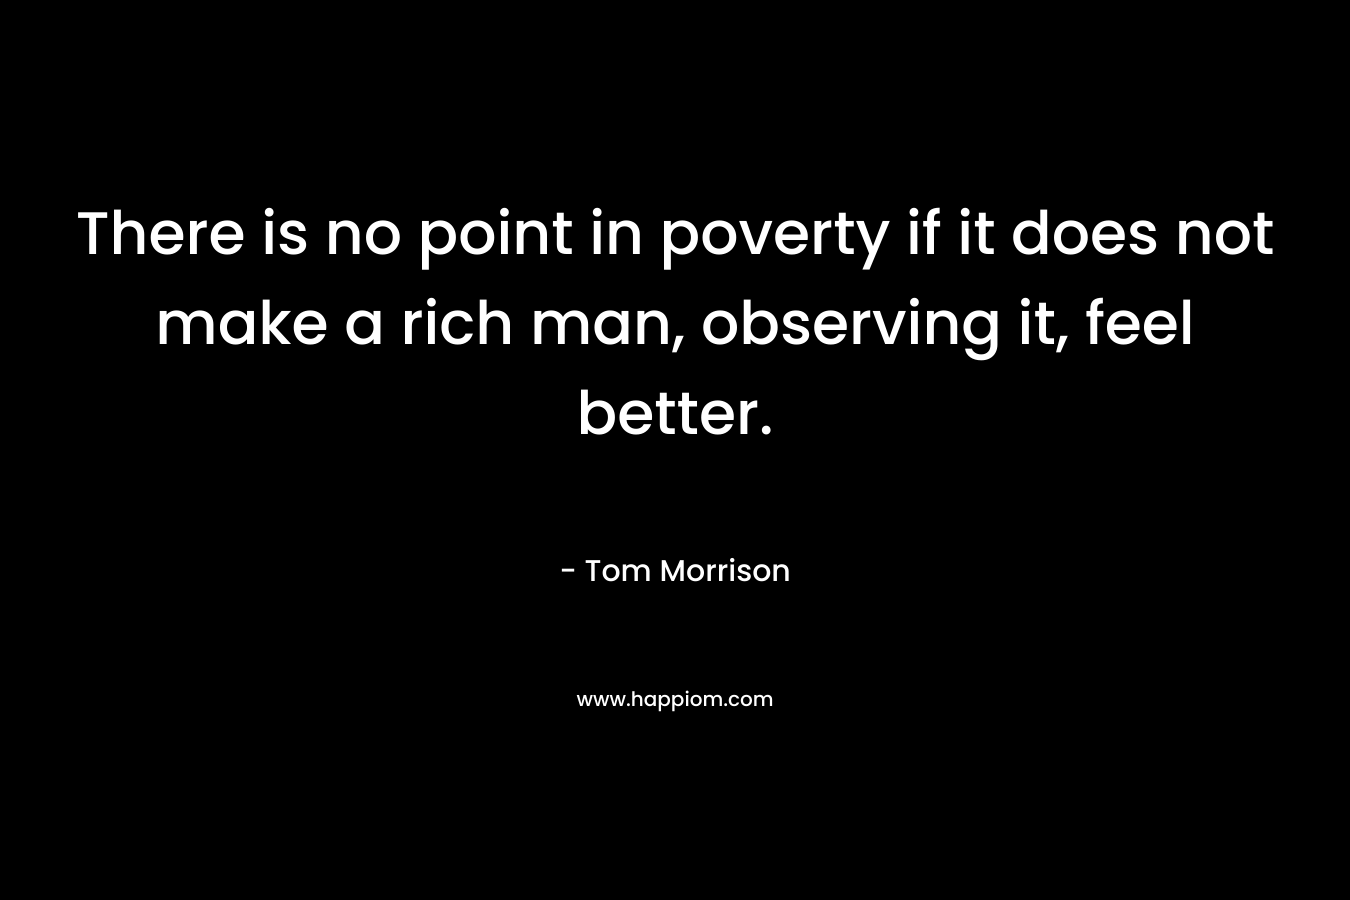 There is no point in poverty if it does not make a rich man, observing it, feel better. – Tom Morrison